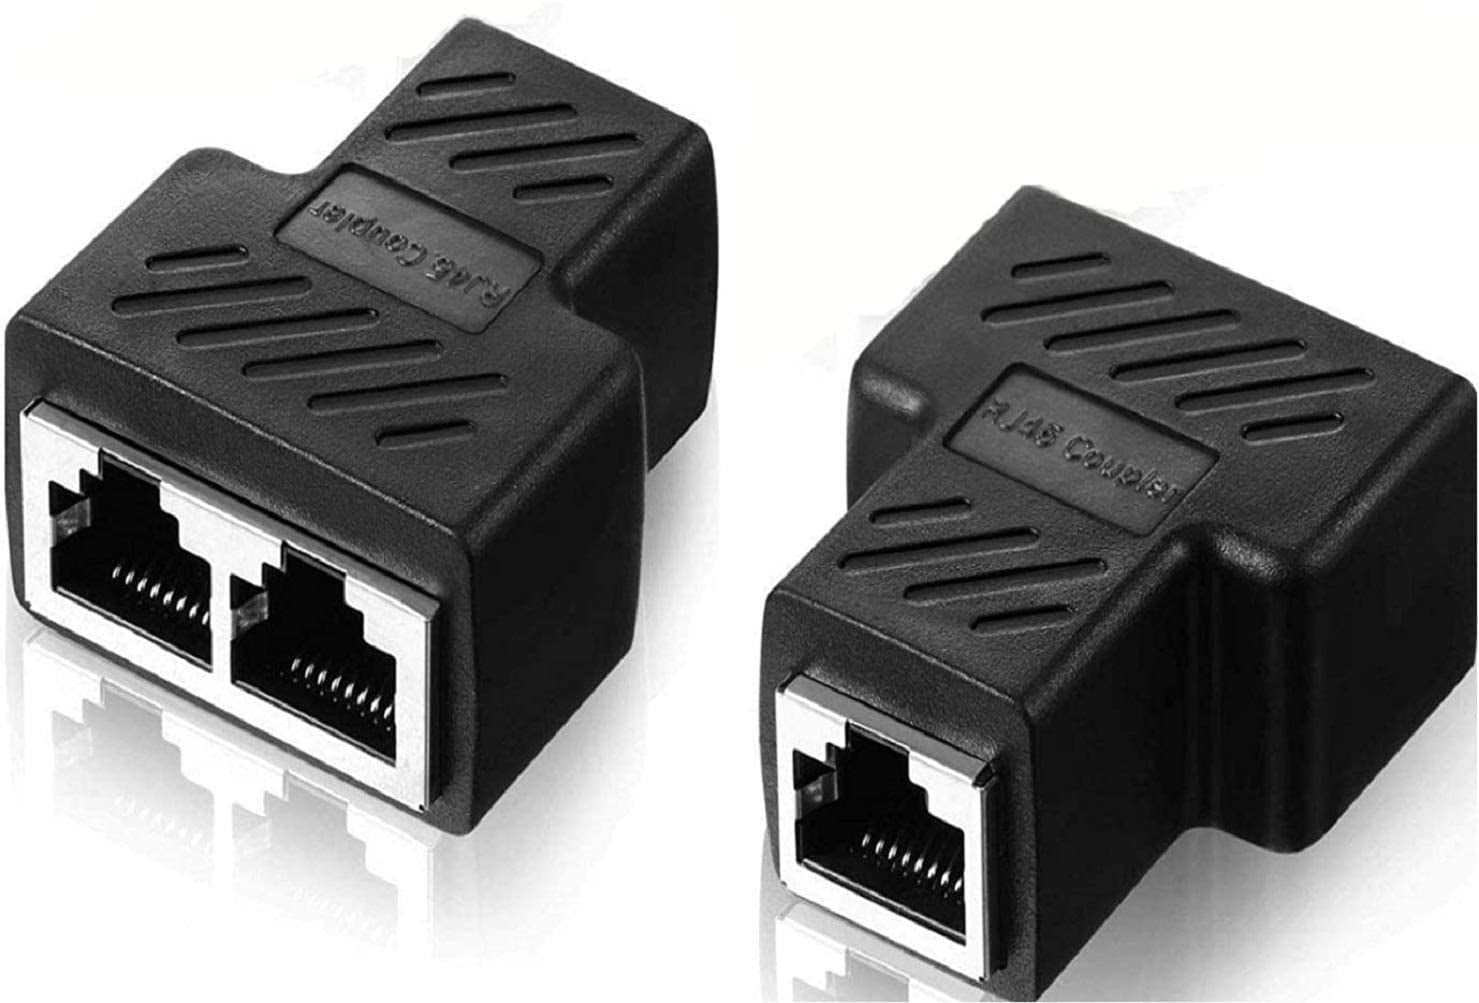 Two Ports Can Work at The Same Time Cat6 Black 2 Pack-Liakai RJ45 Ethernet Splitter Connector Adapter,Compatible with Cat7 Cat5e Cables 